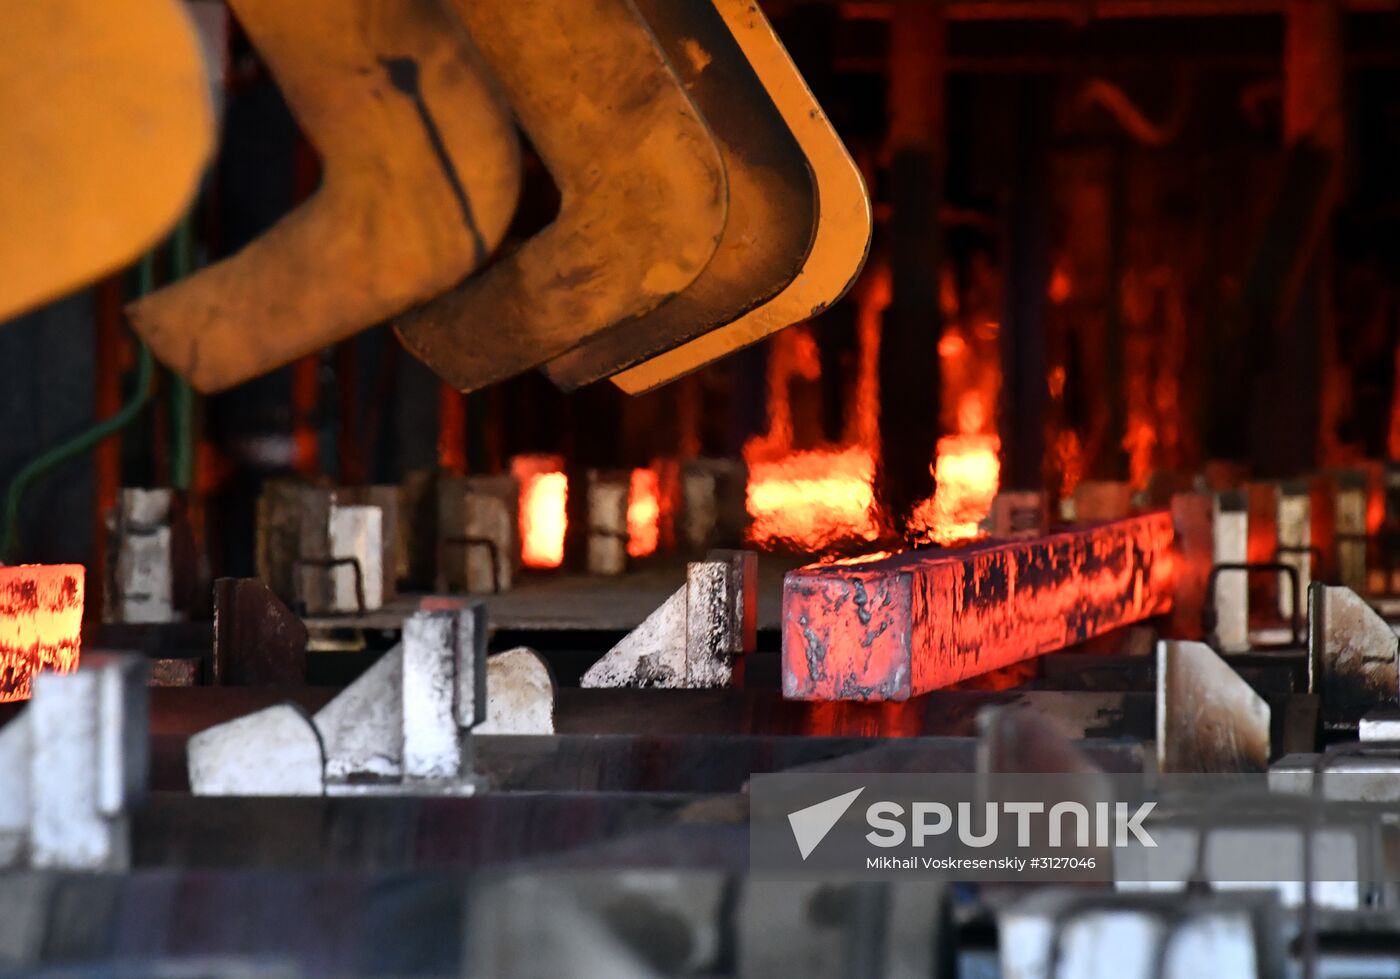 Iron and steel works in Hama, Syria